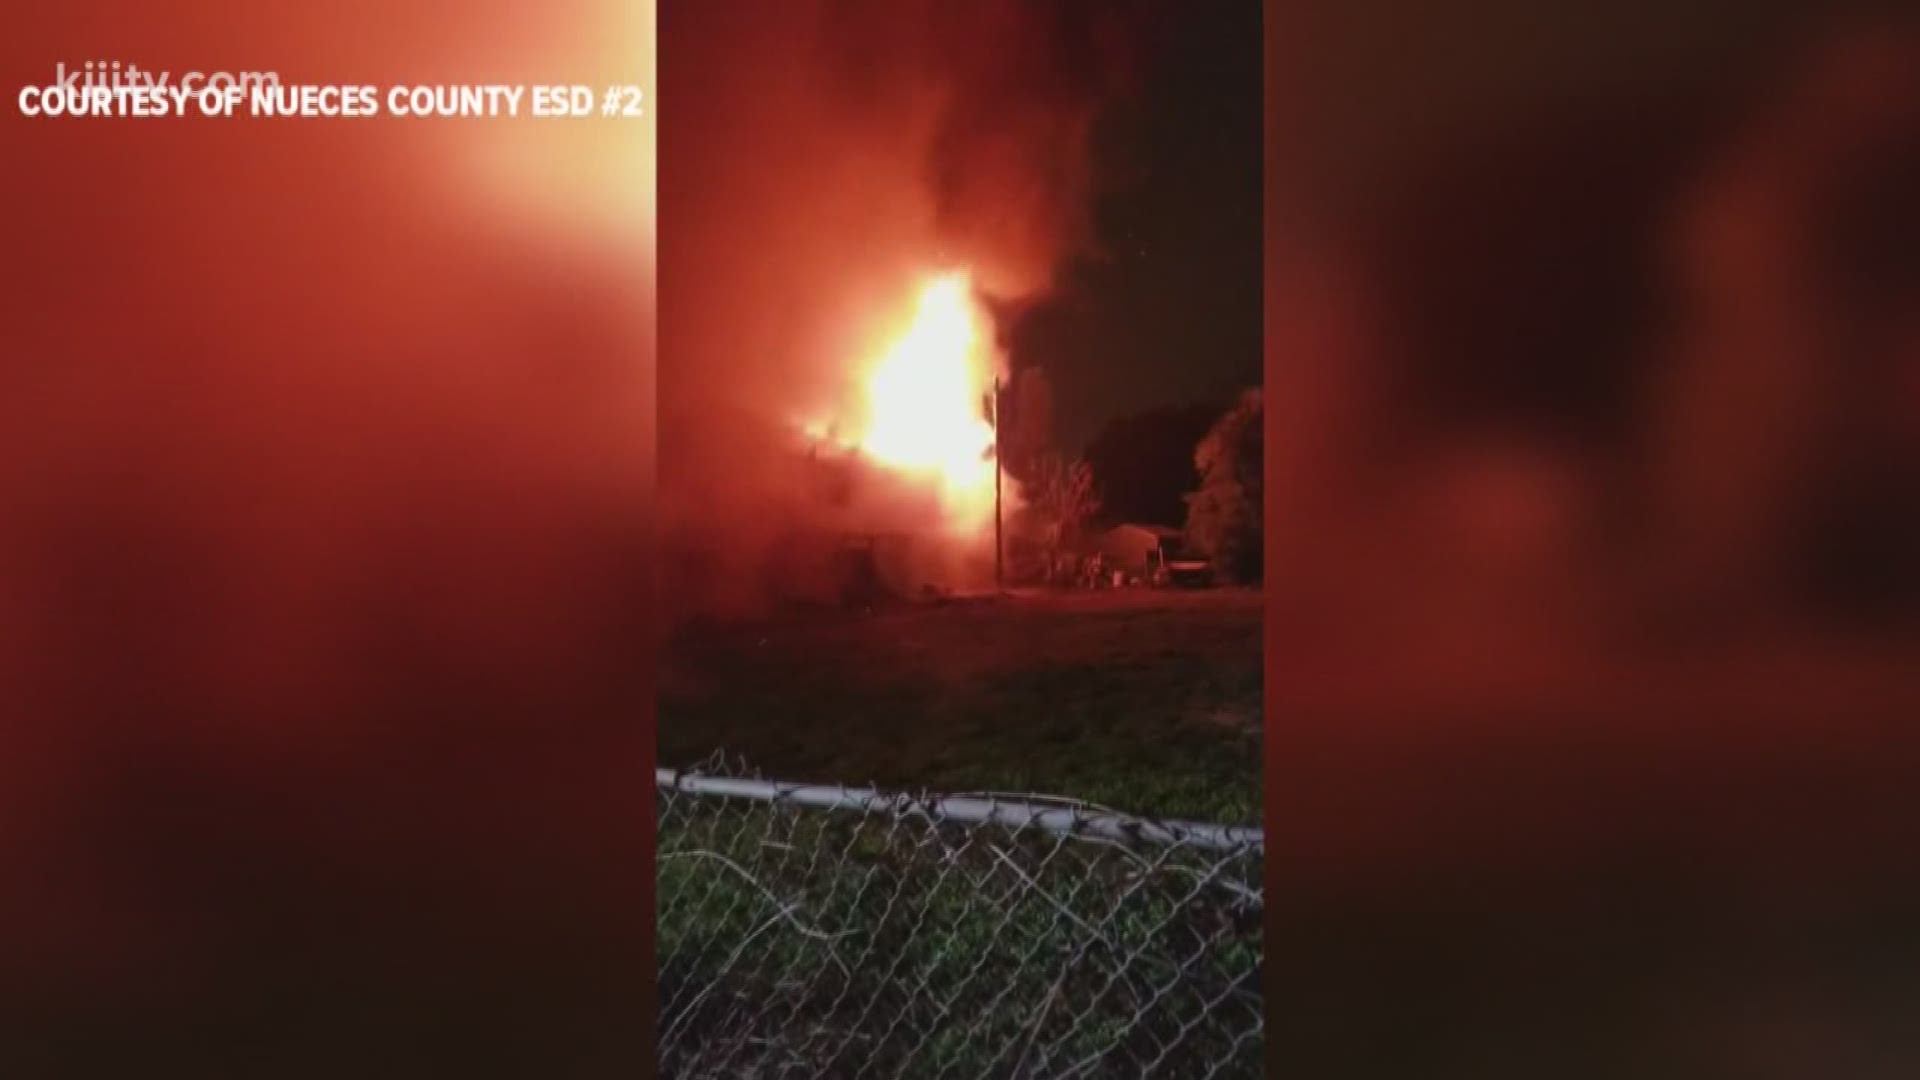 The fire broke out on the 700 Block of Webb Street just after 4 a.m. Saturday.